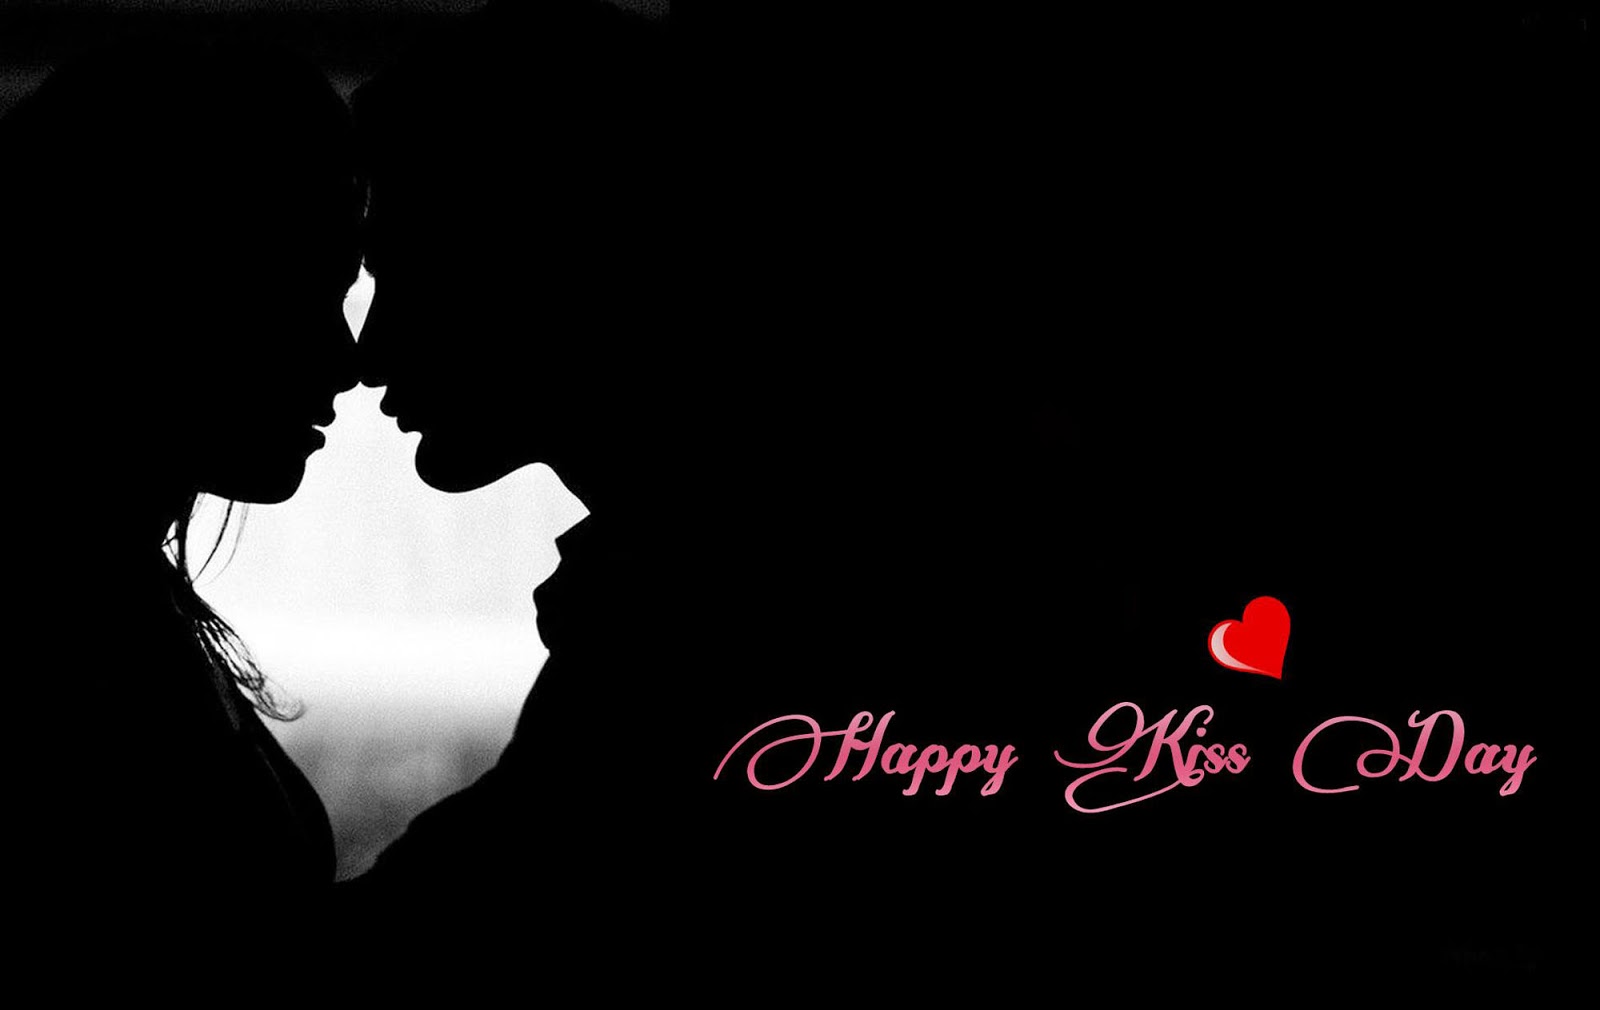 Kiss Day  free happy valentines day images  Happy Valentines Day  Greetings  Happy Valentines Day Messages  Happy Valentines Day Gifts   Happy Valentines Day Wallpapers  Valentines Day SMS